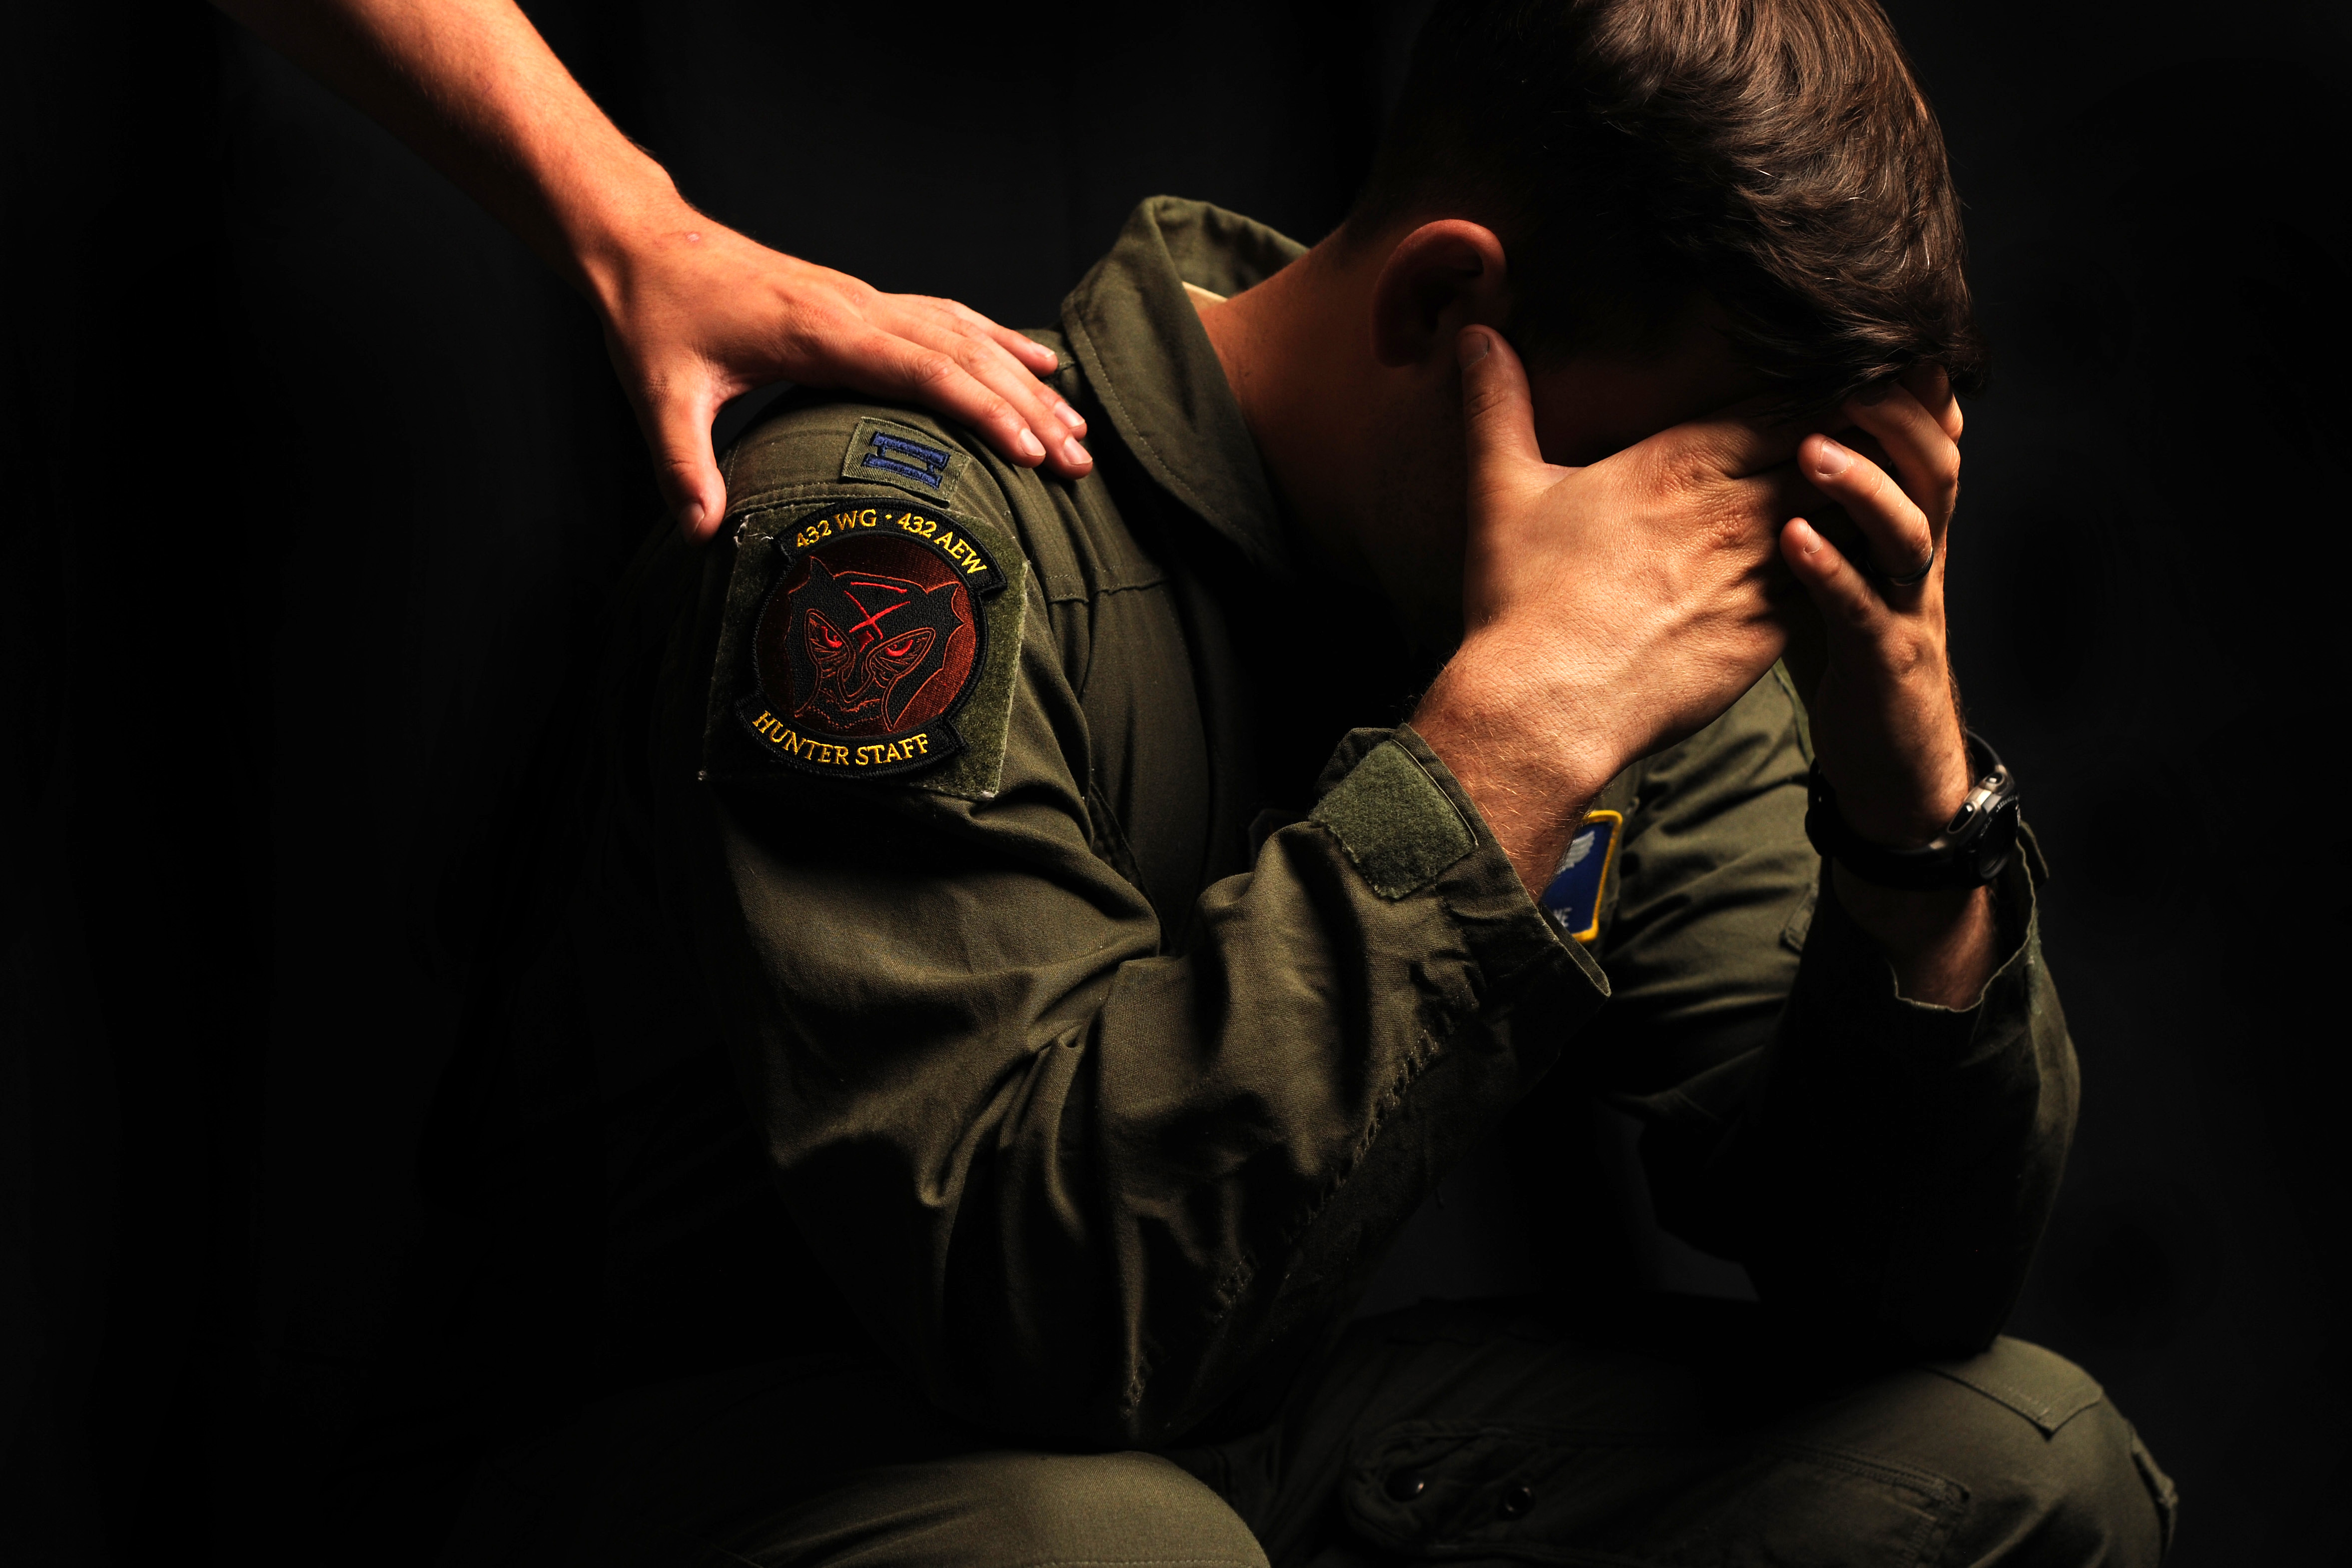 What Are The Signs Of PTSD?